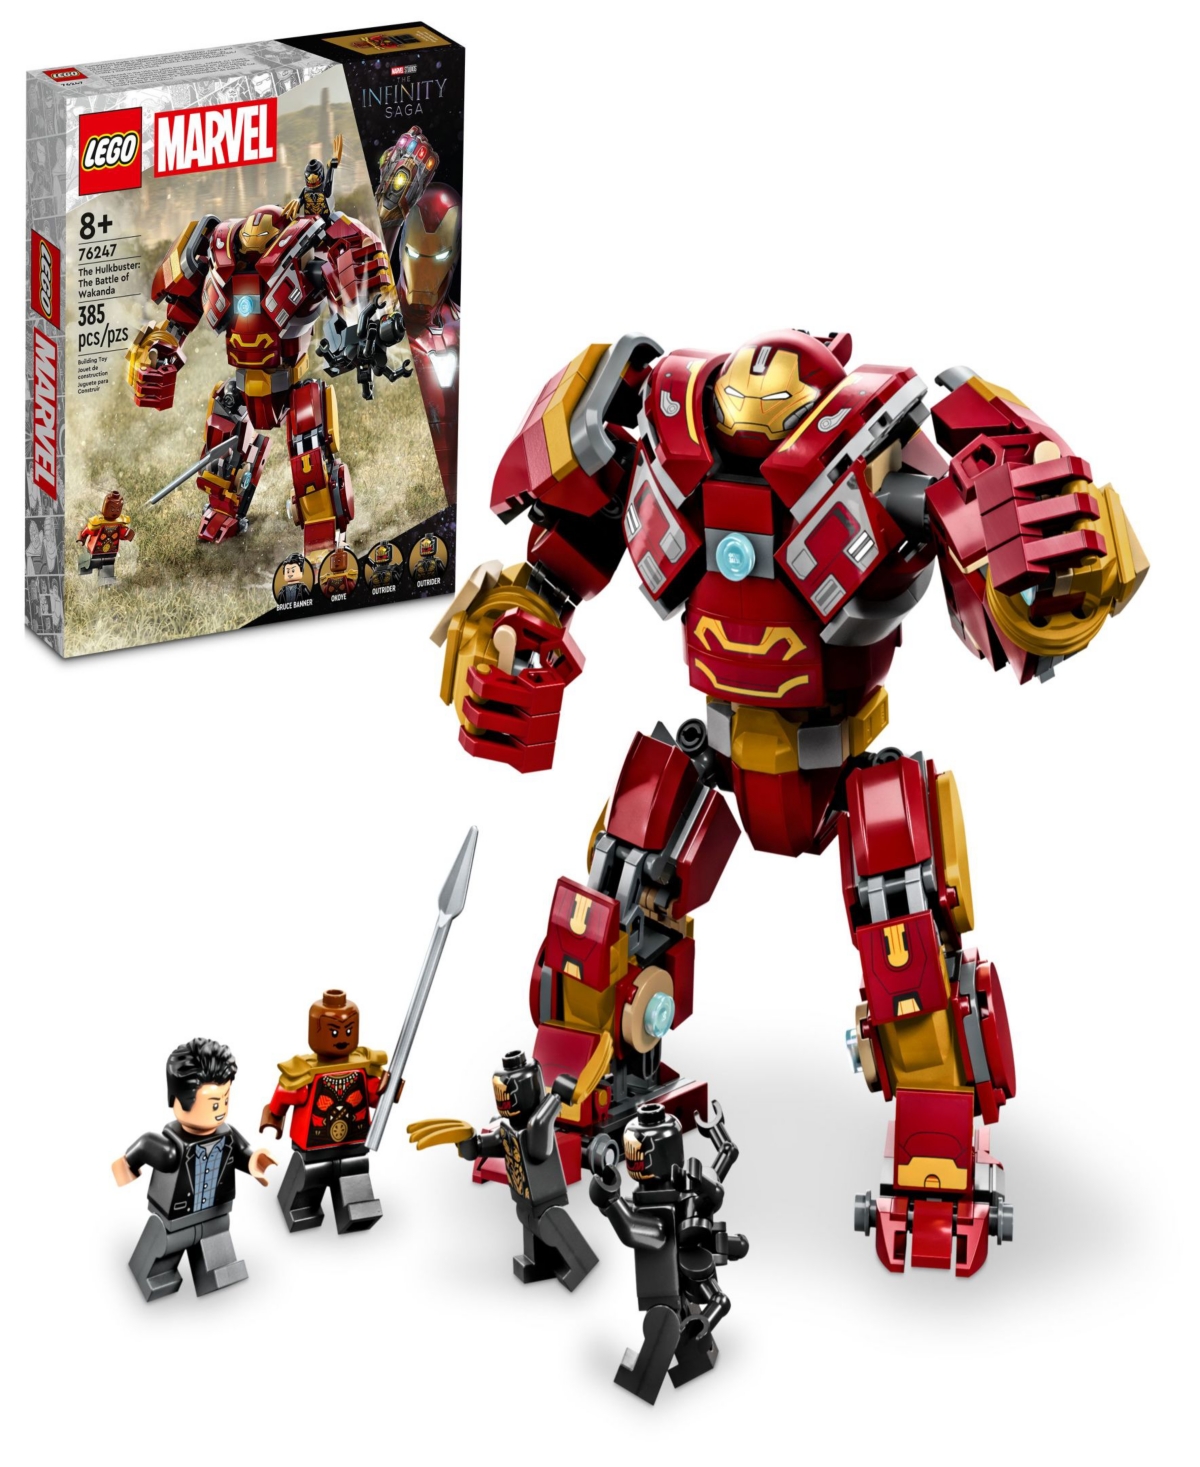 Lego Super Heroes Marvel 76247 The Hulkbuster: The Battle Of Wakanda Toy Building Set With Bruce Banner, In Multicolor